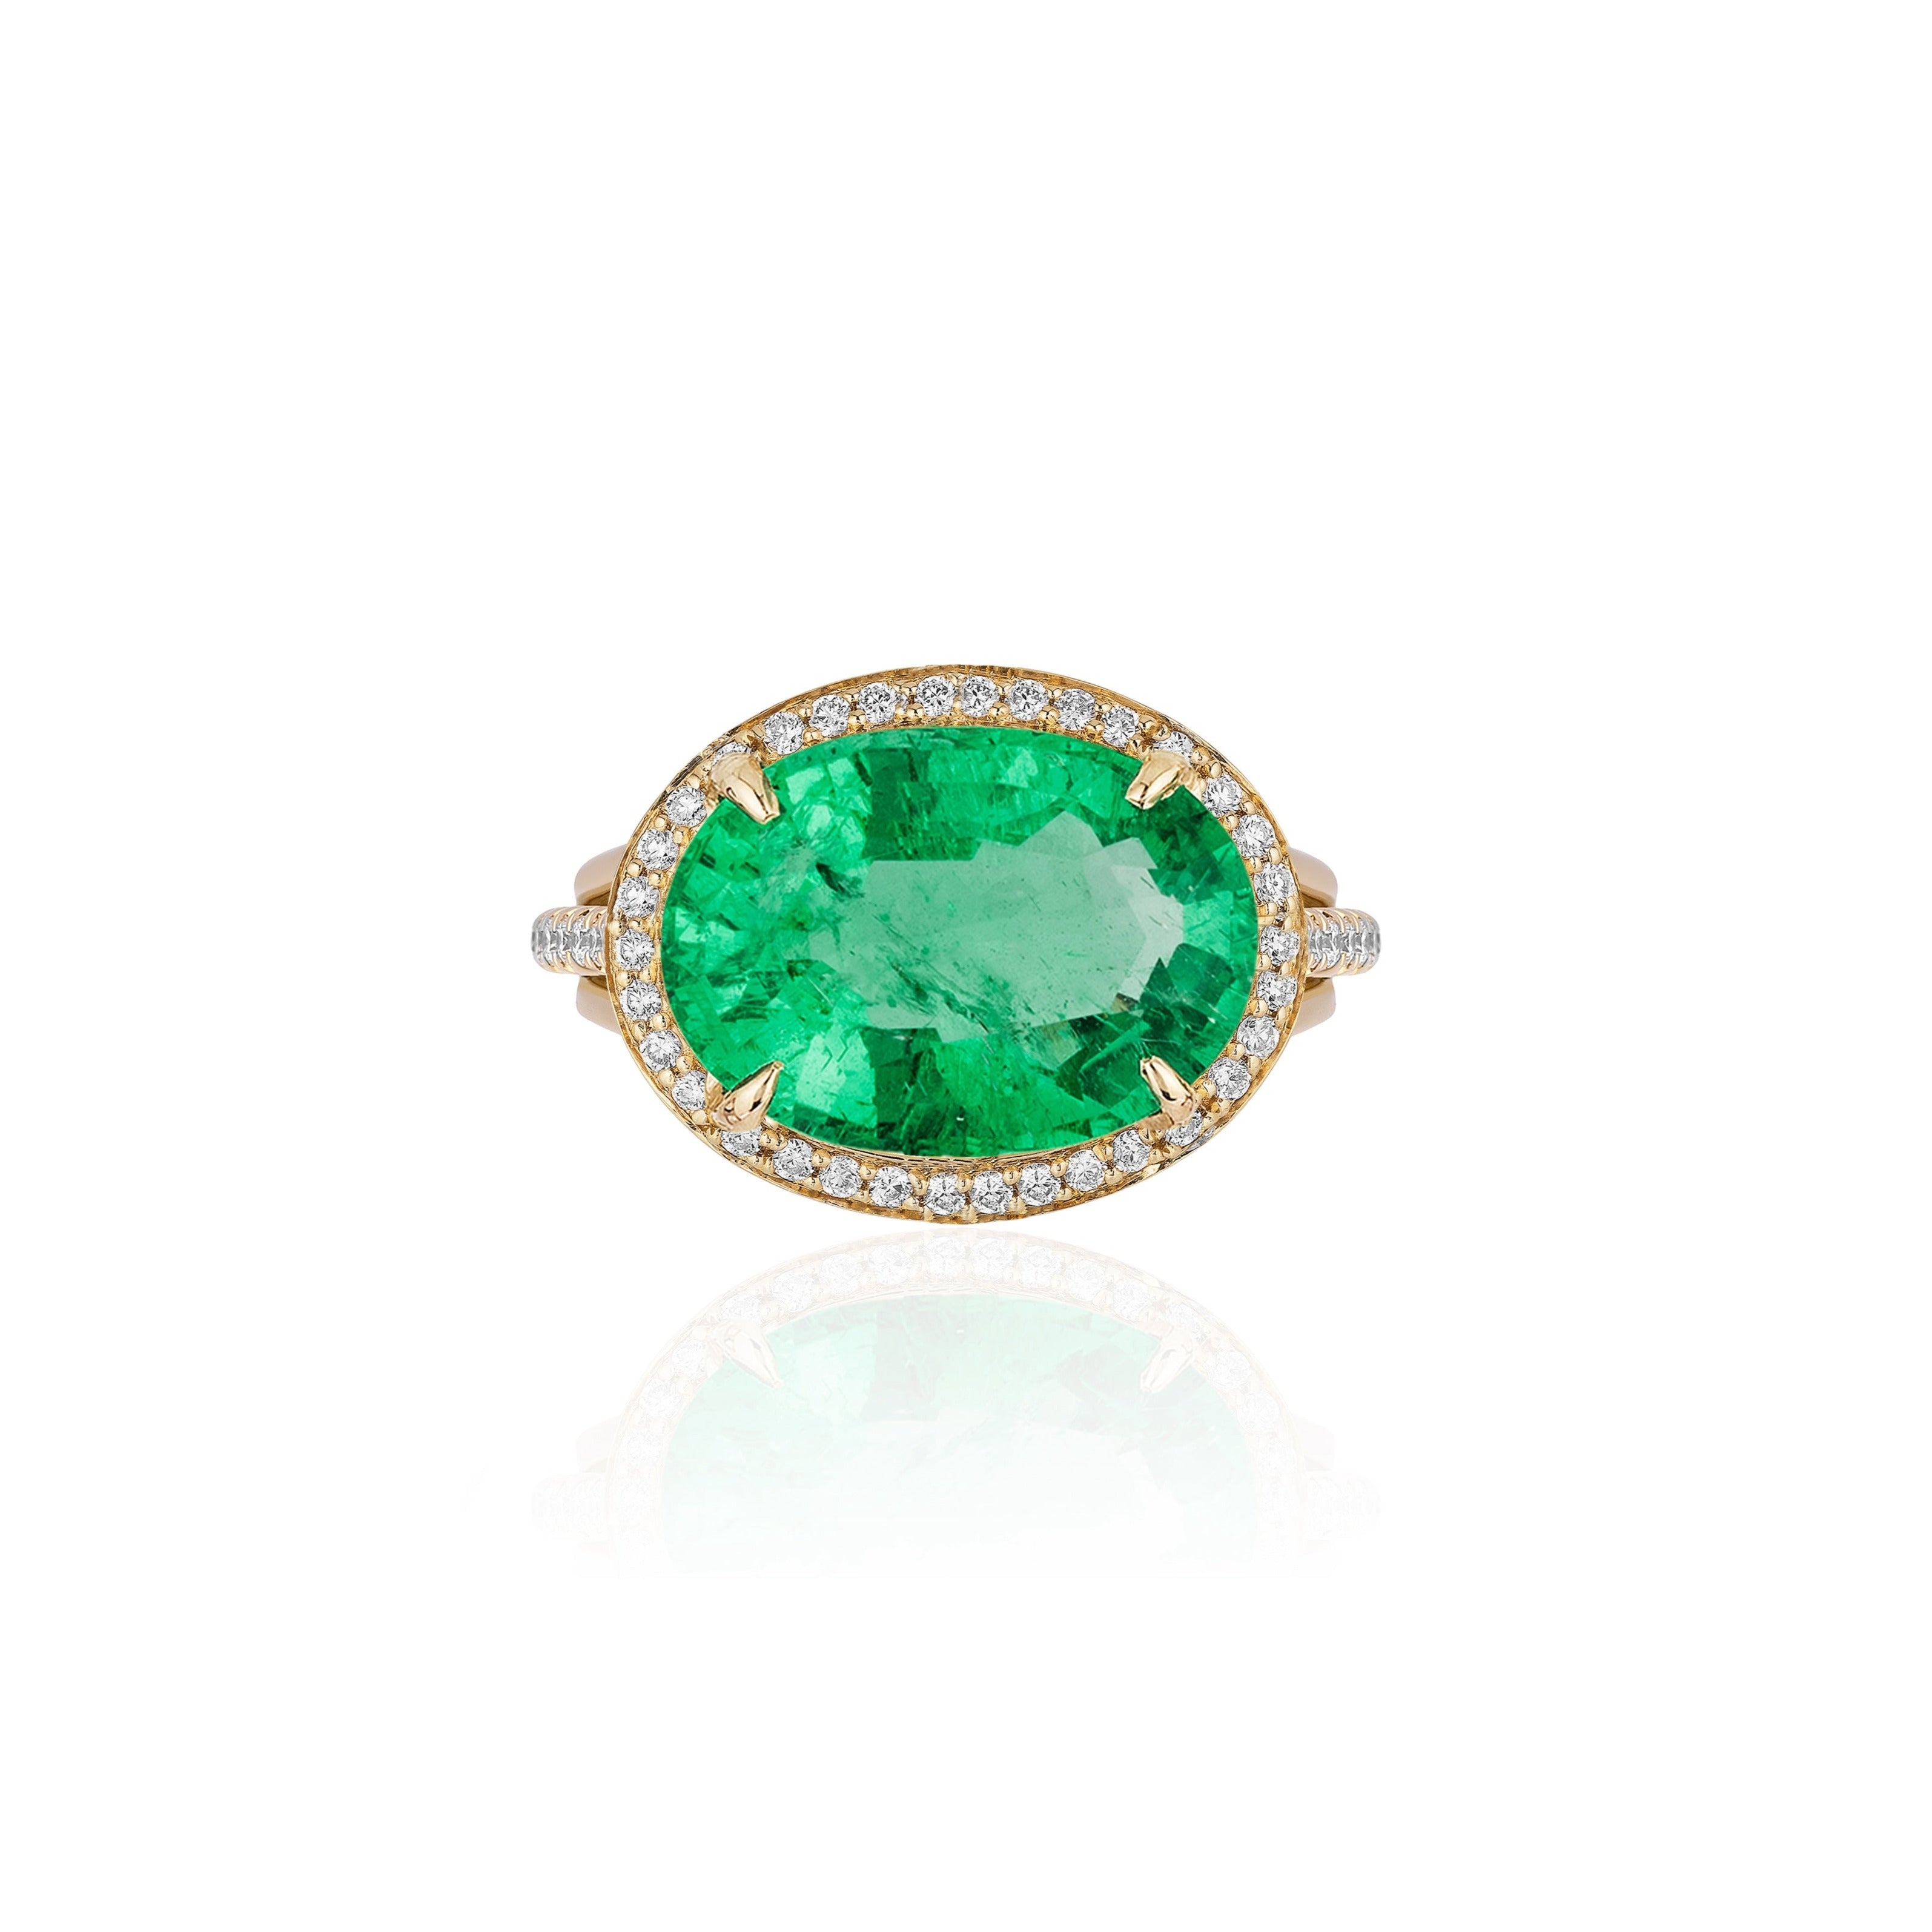 One of a Kind Glowing Oval Shape Emerald Ring With Diamonds